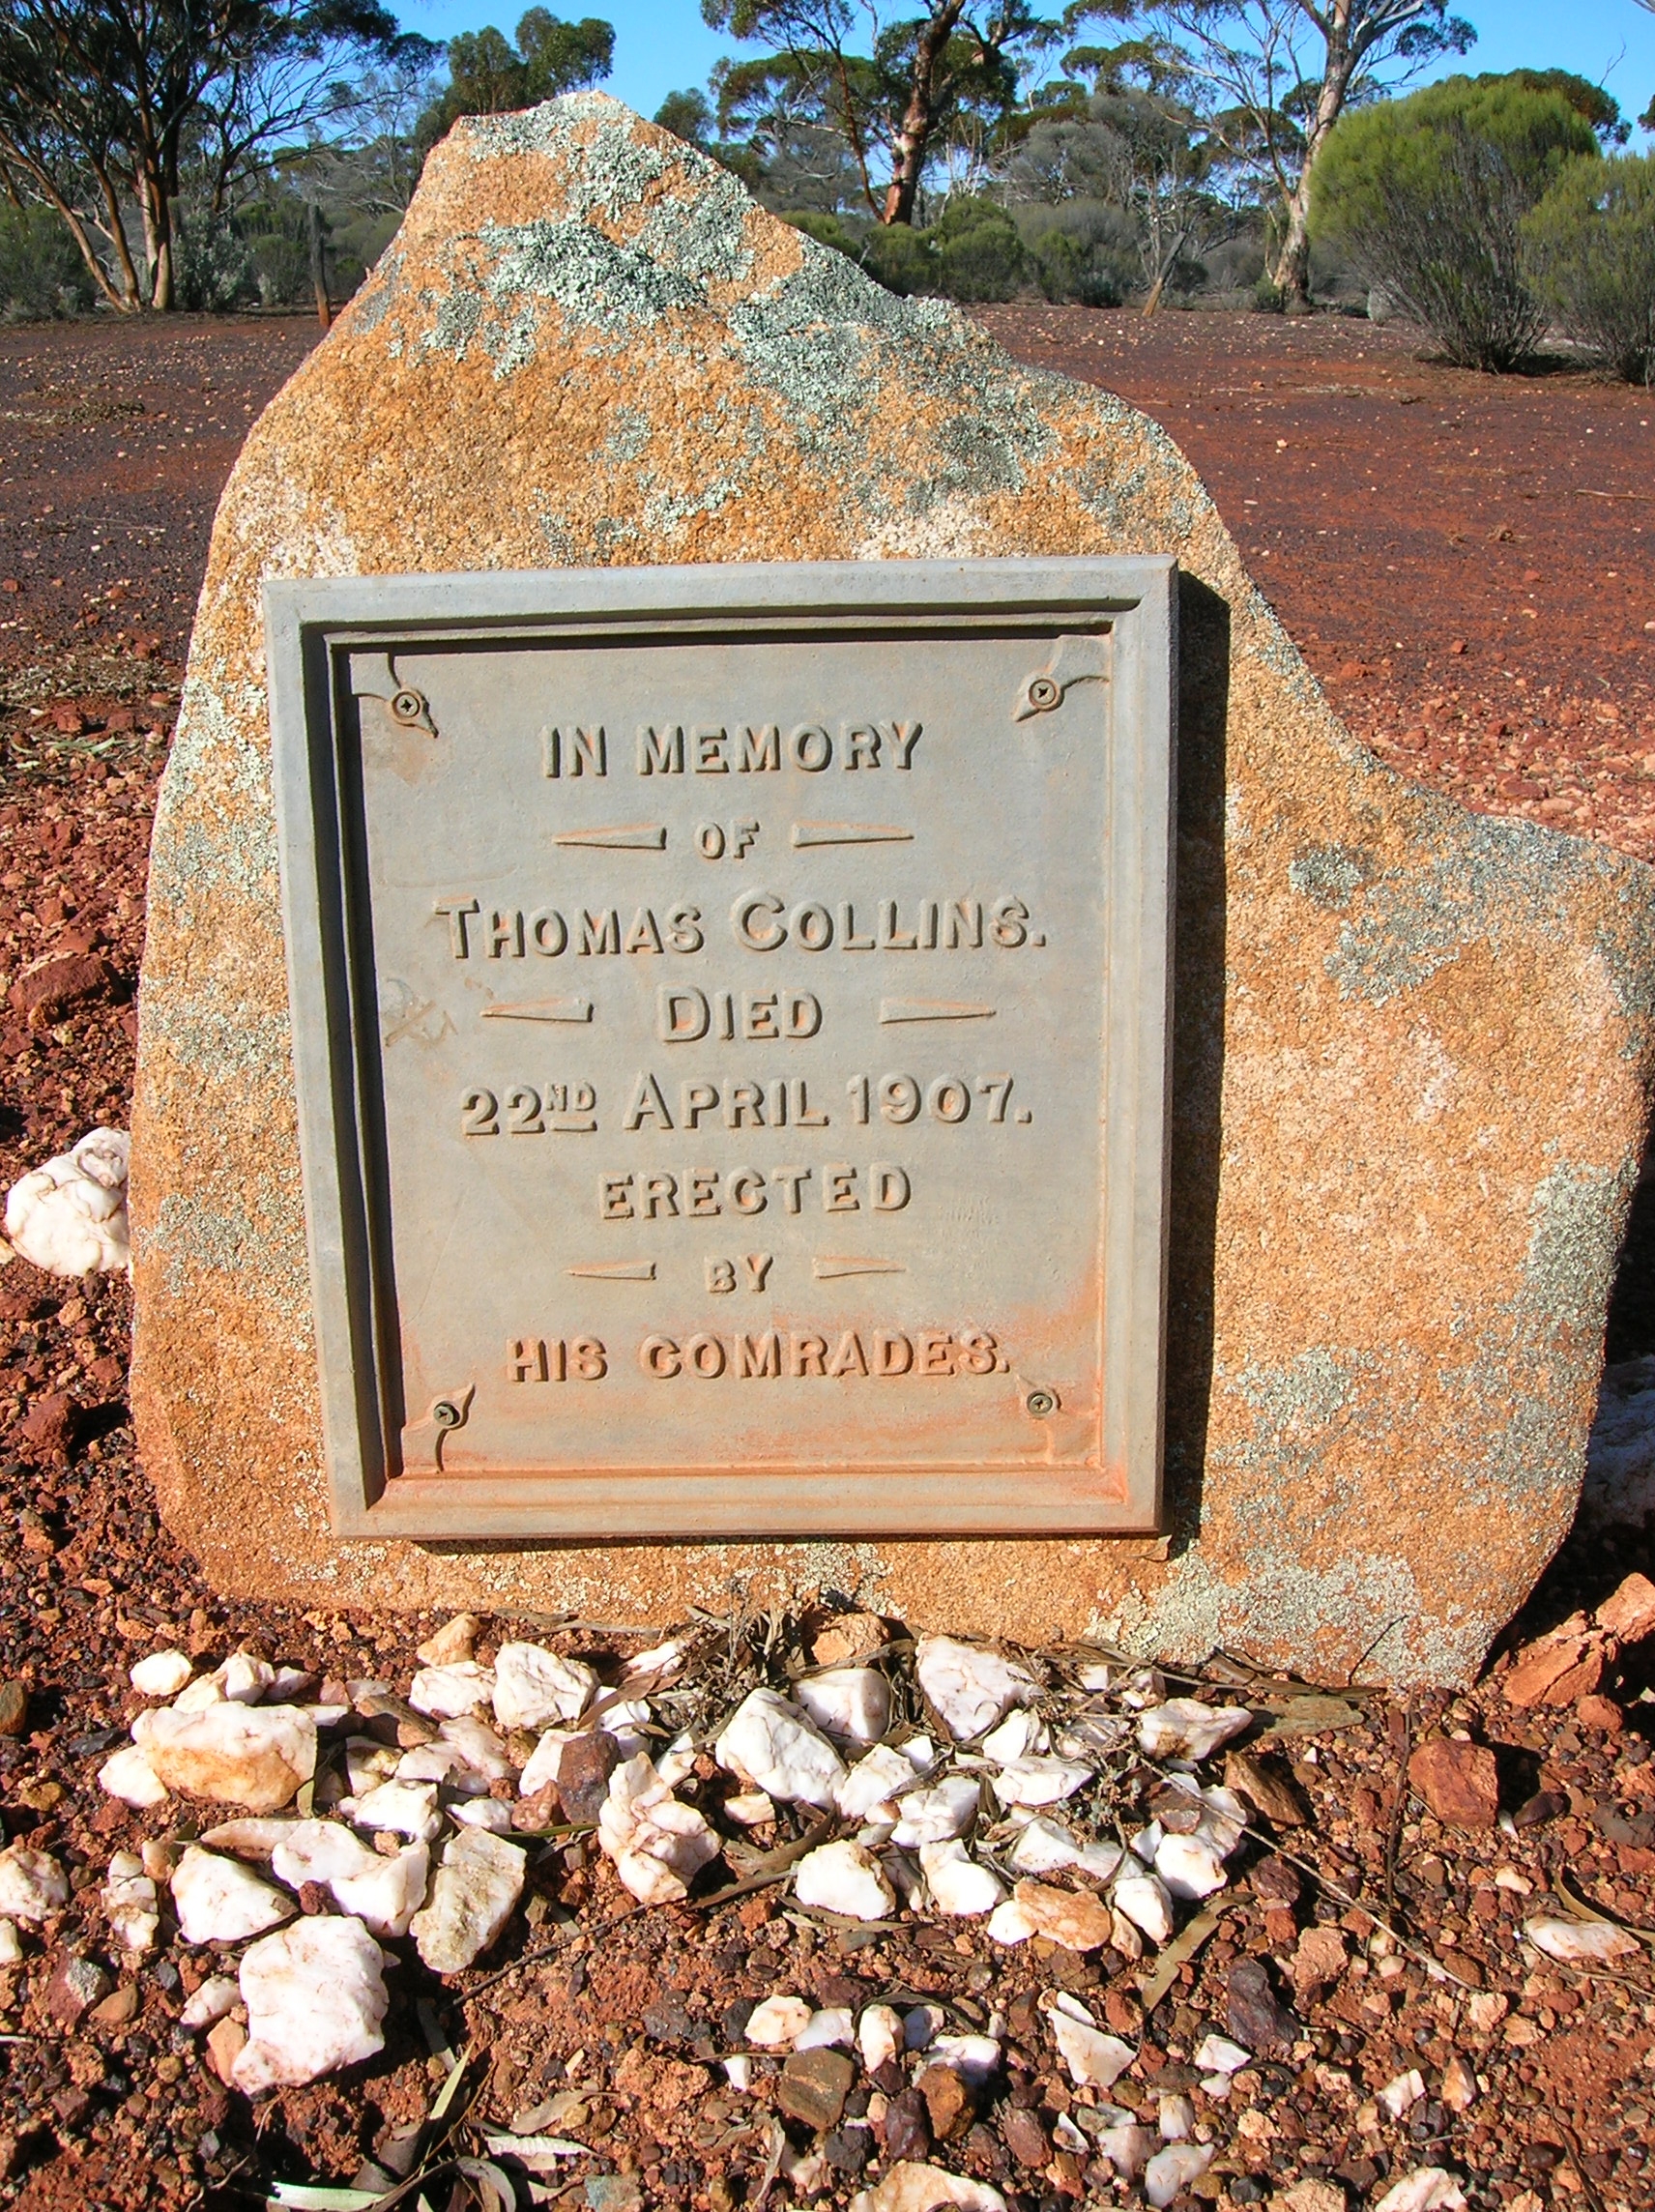 This is a photograph of the Memorial plaque for Thomas COLLINS